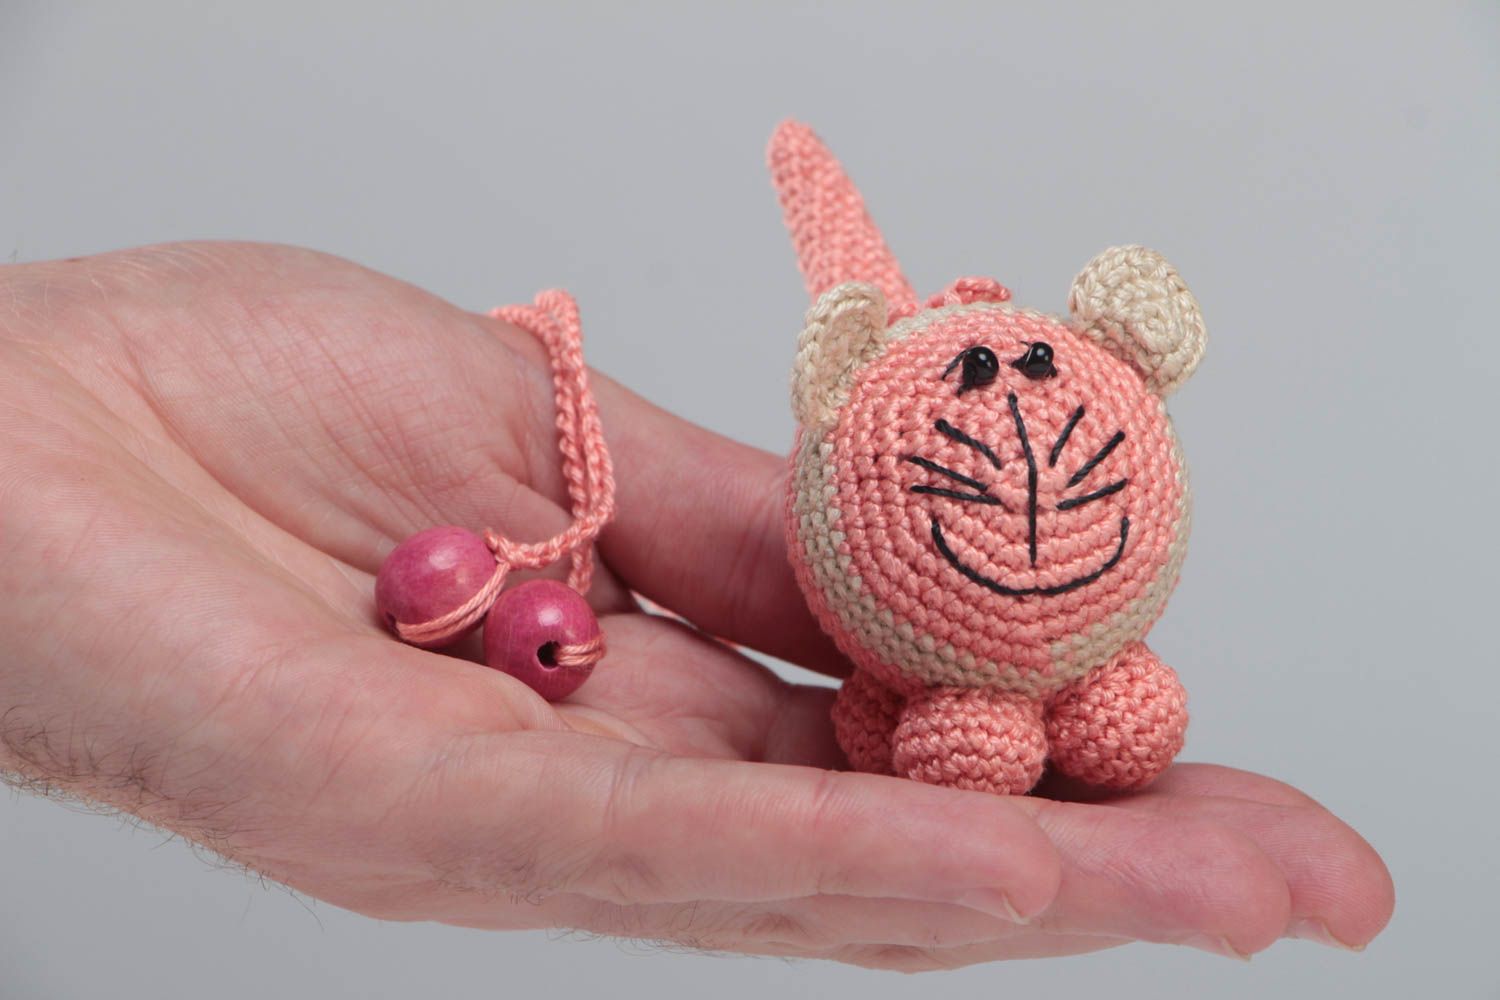 Crocheted cotton rattle small pink cat handmade toy for children and nursery photo 5